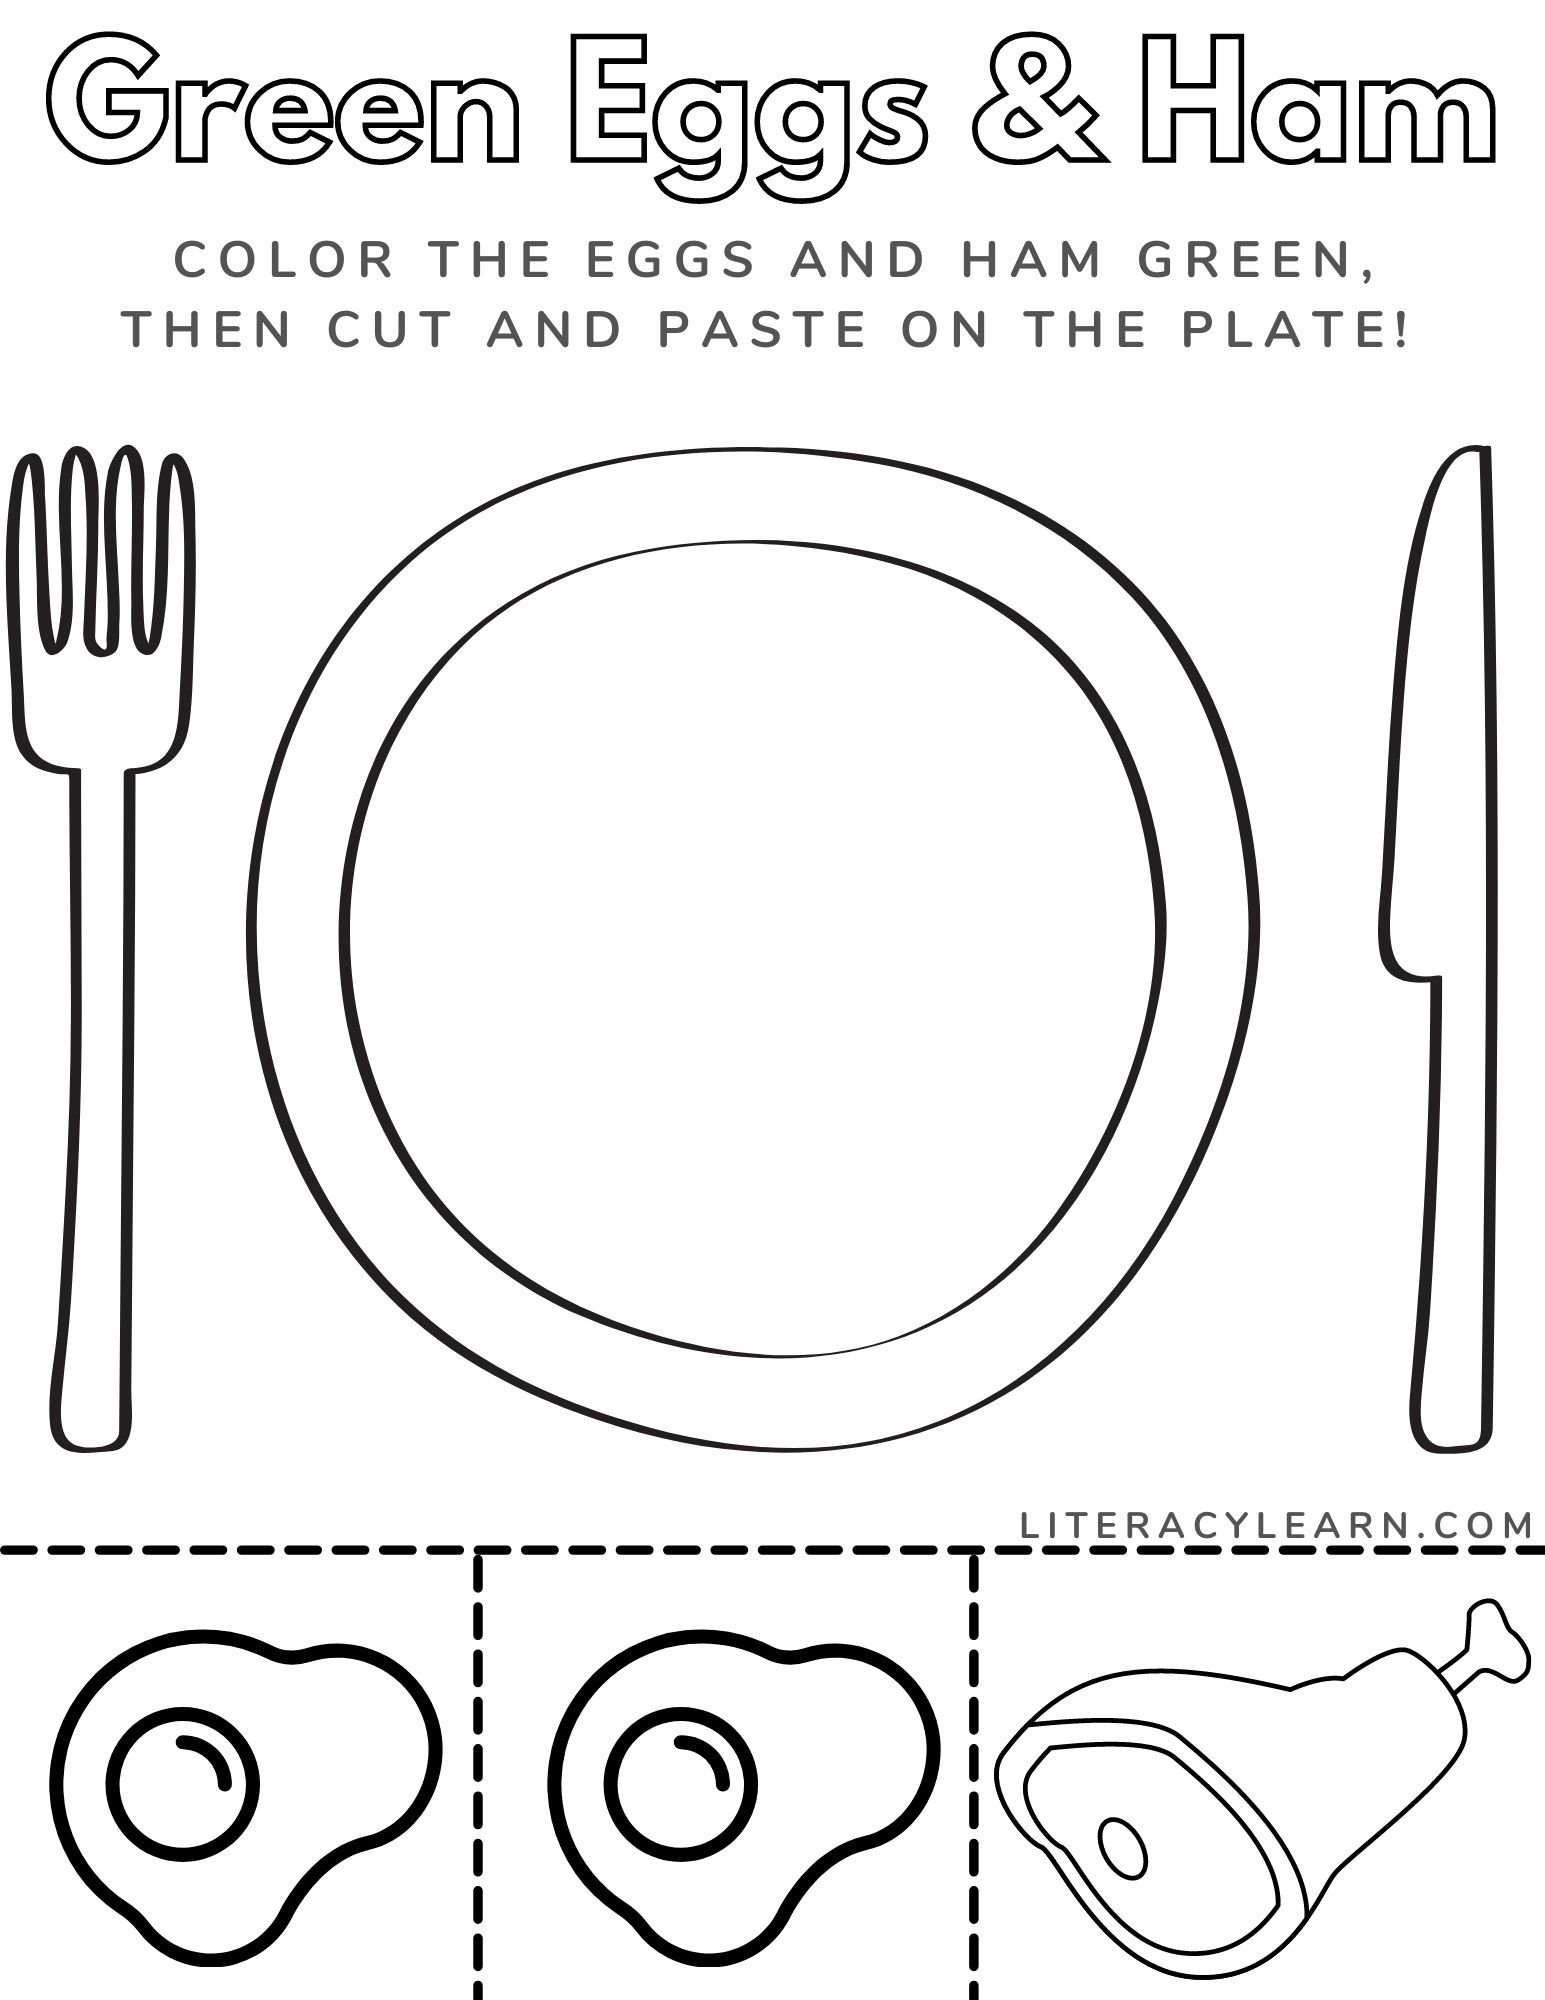 Printable worksheet with a large plate, two eggs, and ham for children to color and cut and paste. 